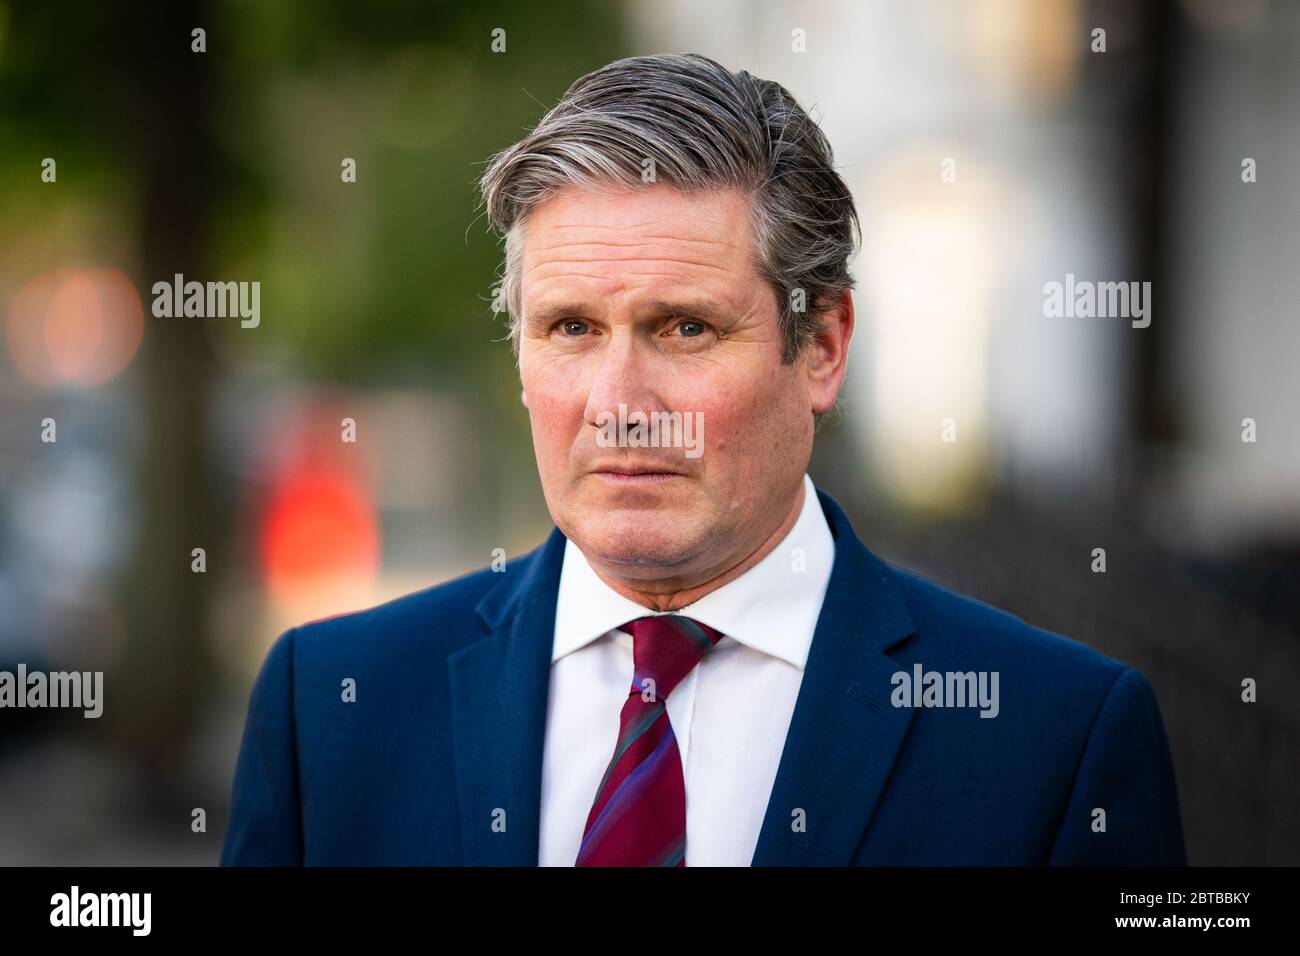 Labour leader Sir Keir Starmer issues a statement outside his home in north London, after Prime Minister Boris Johnson backed his de facto chief-of-staff Dominic Cummings following allegations he breached lockdown restrictions, as Mr Cummings had driven from his London home to Durham in March after his wife started displaying Covid-19 symptoms becoming fearful there would be no-one to look after his four-year-old child if he also took ill. Stock Photo